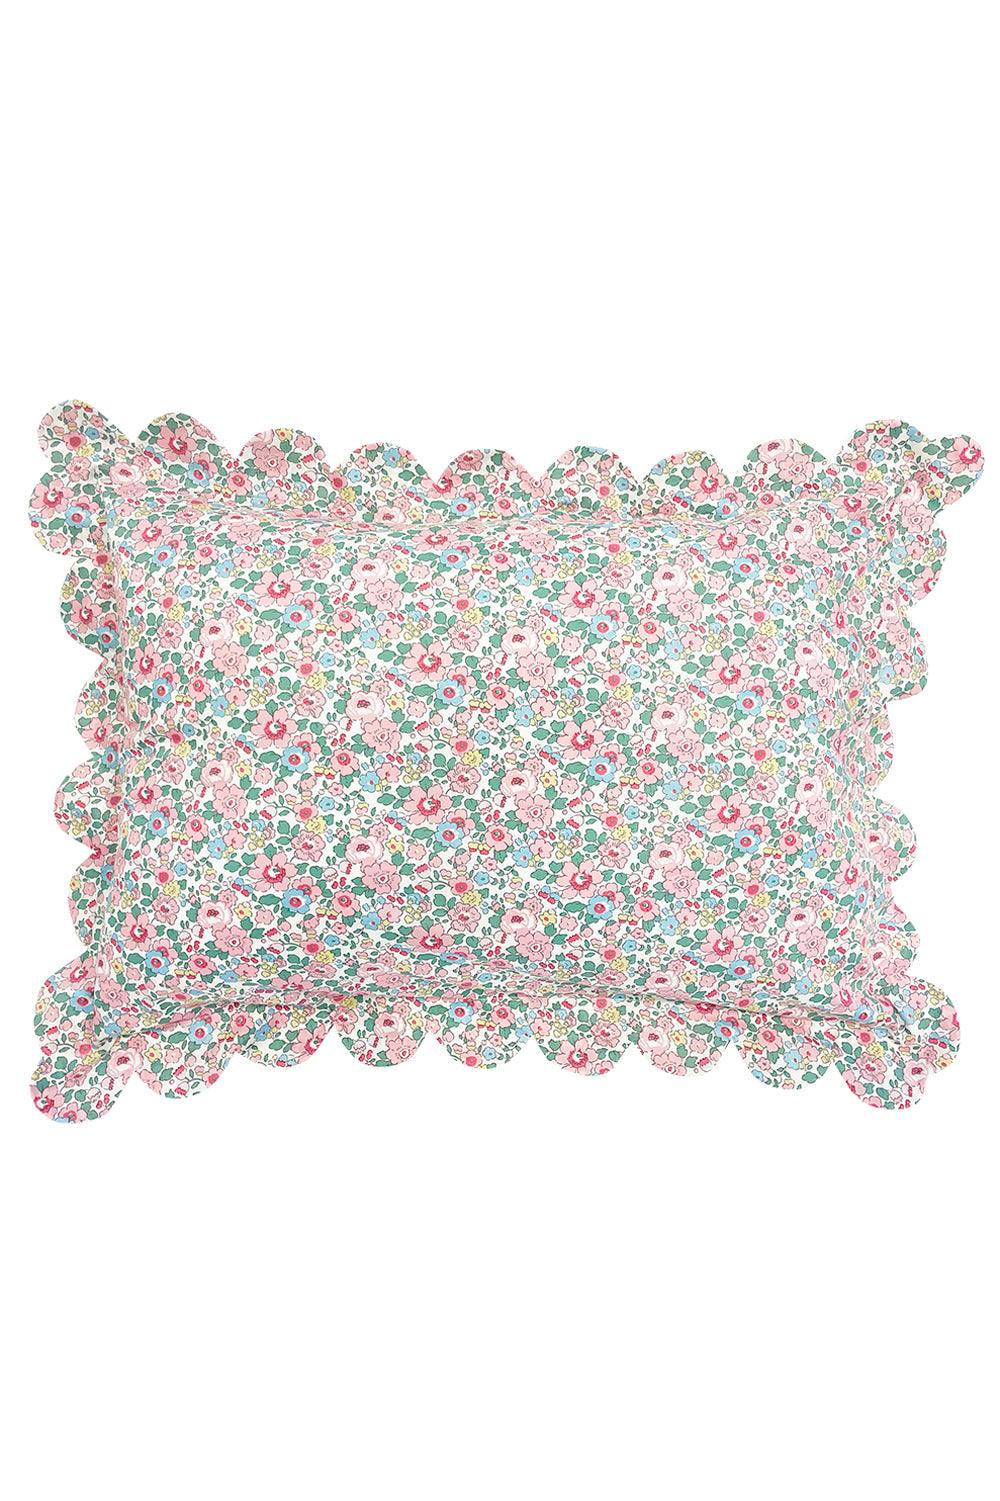 Scallop Edge Pillowcase made with Liberty Fabric BETSY CANDY FLOSS - Coco & Wolf